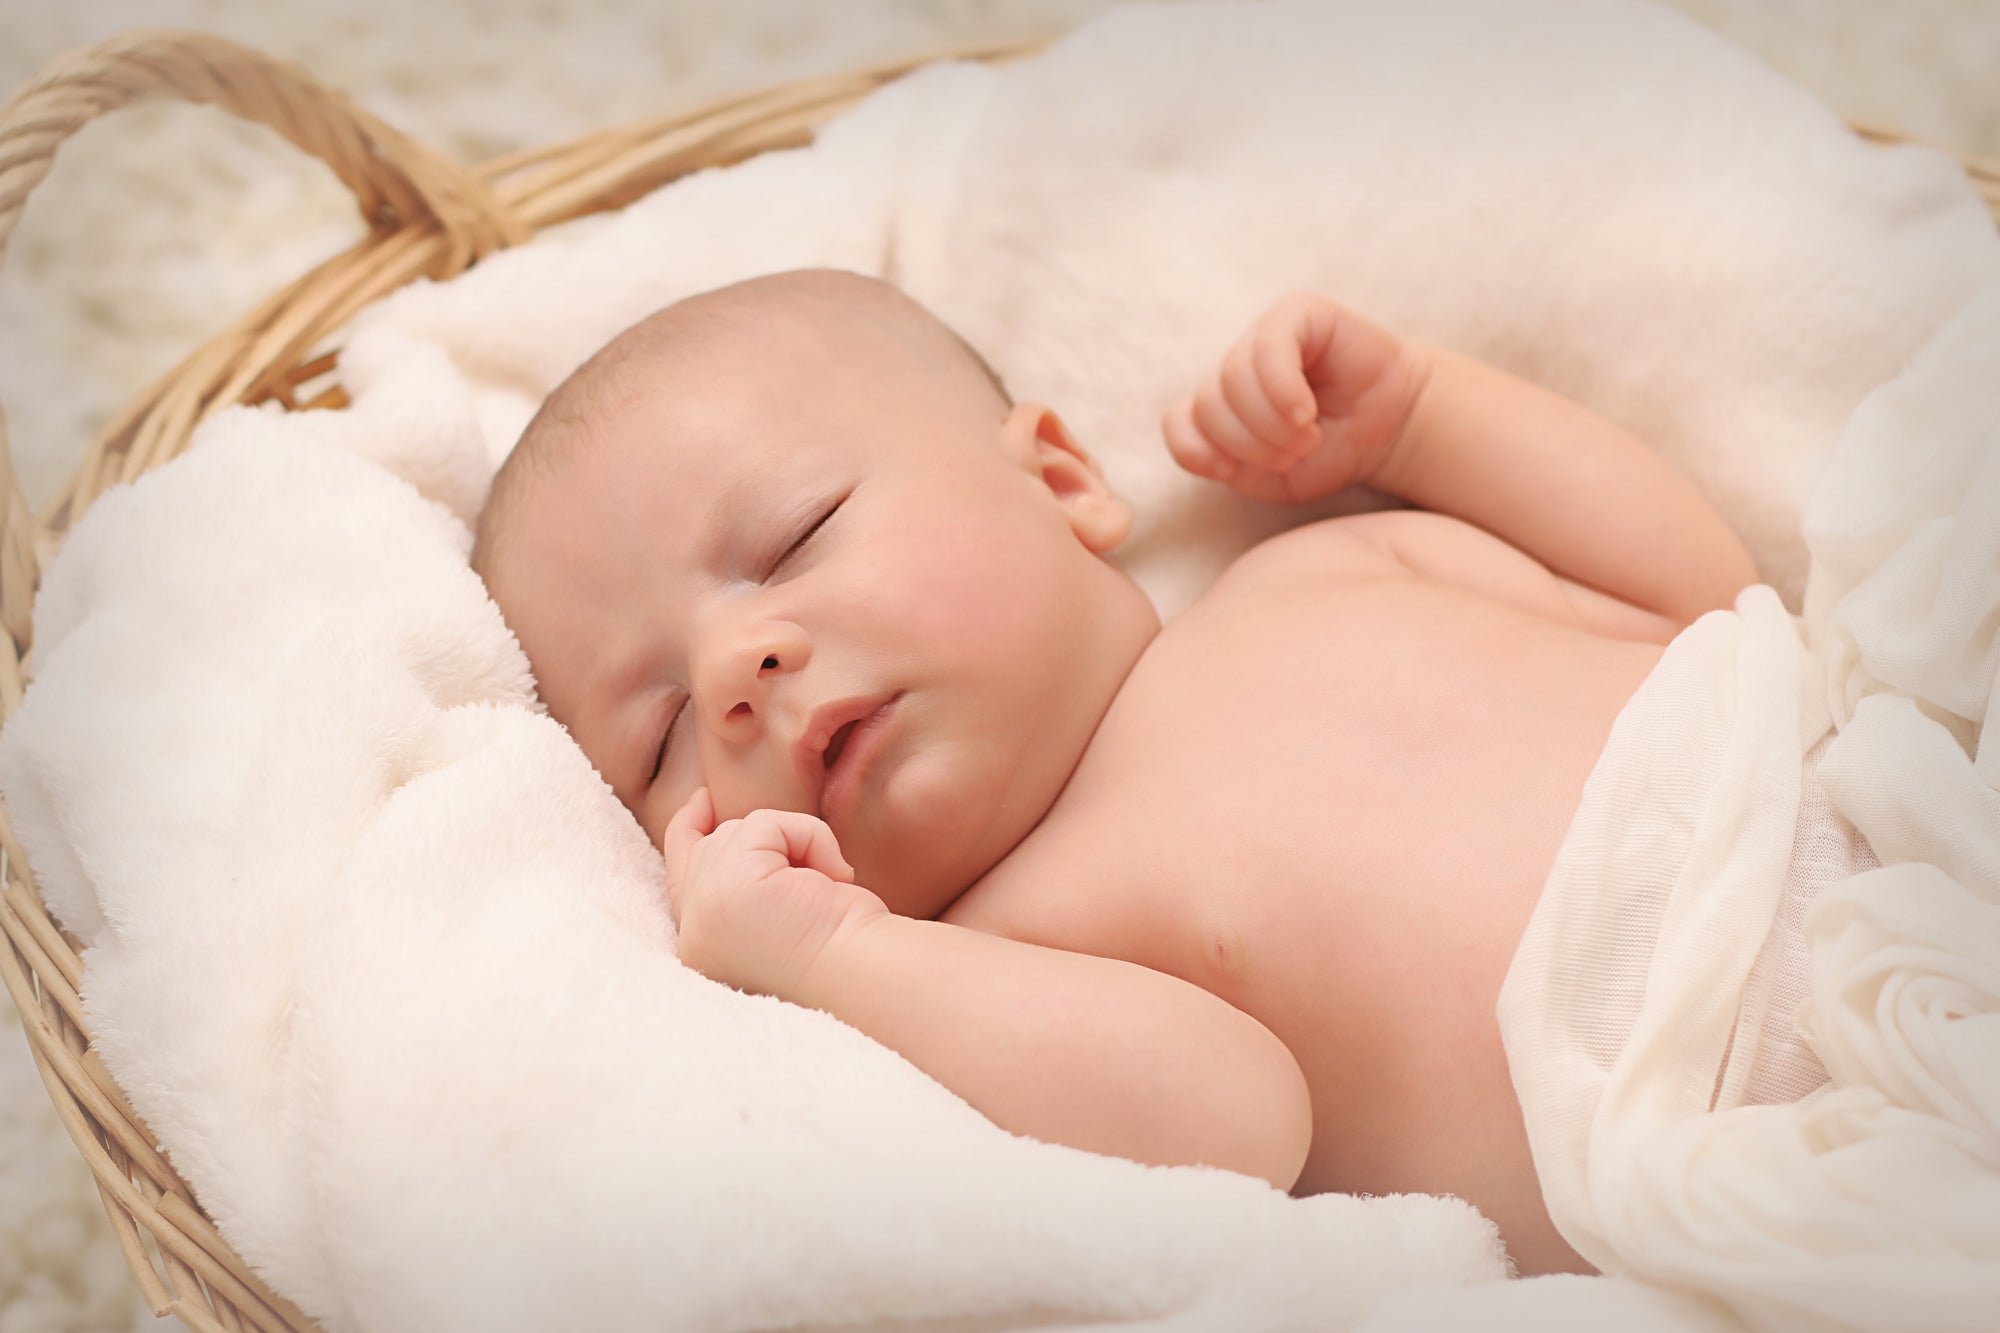 Should You Look into Hiring a Baby Sleep Consultant?